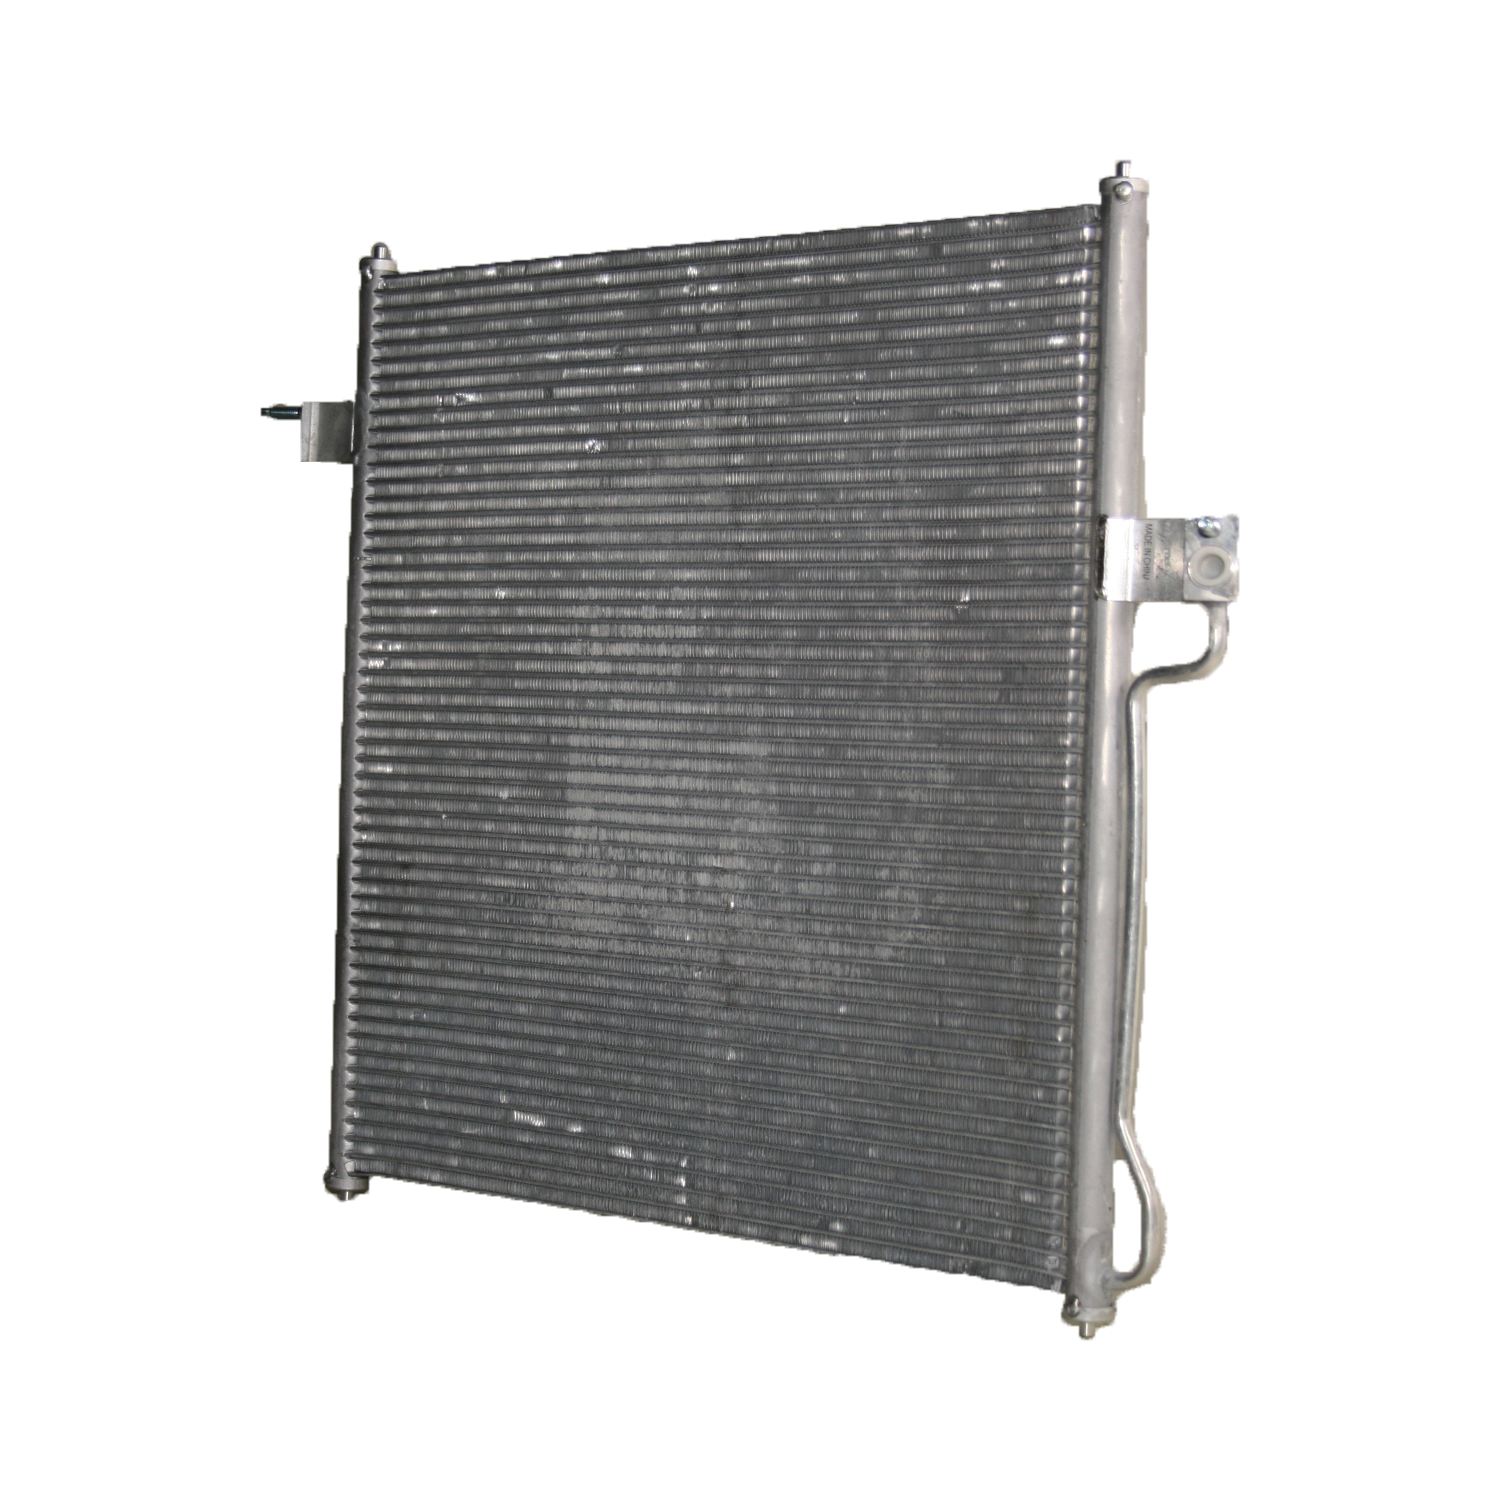 TCW Condenser 44-3056 New Product Image field_60b6a13a6e67c